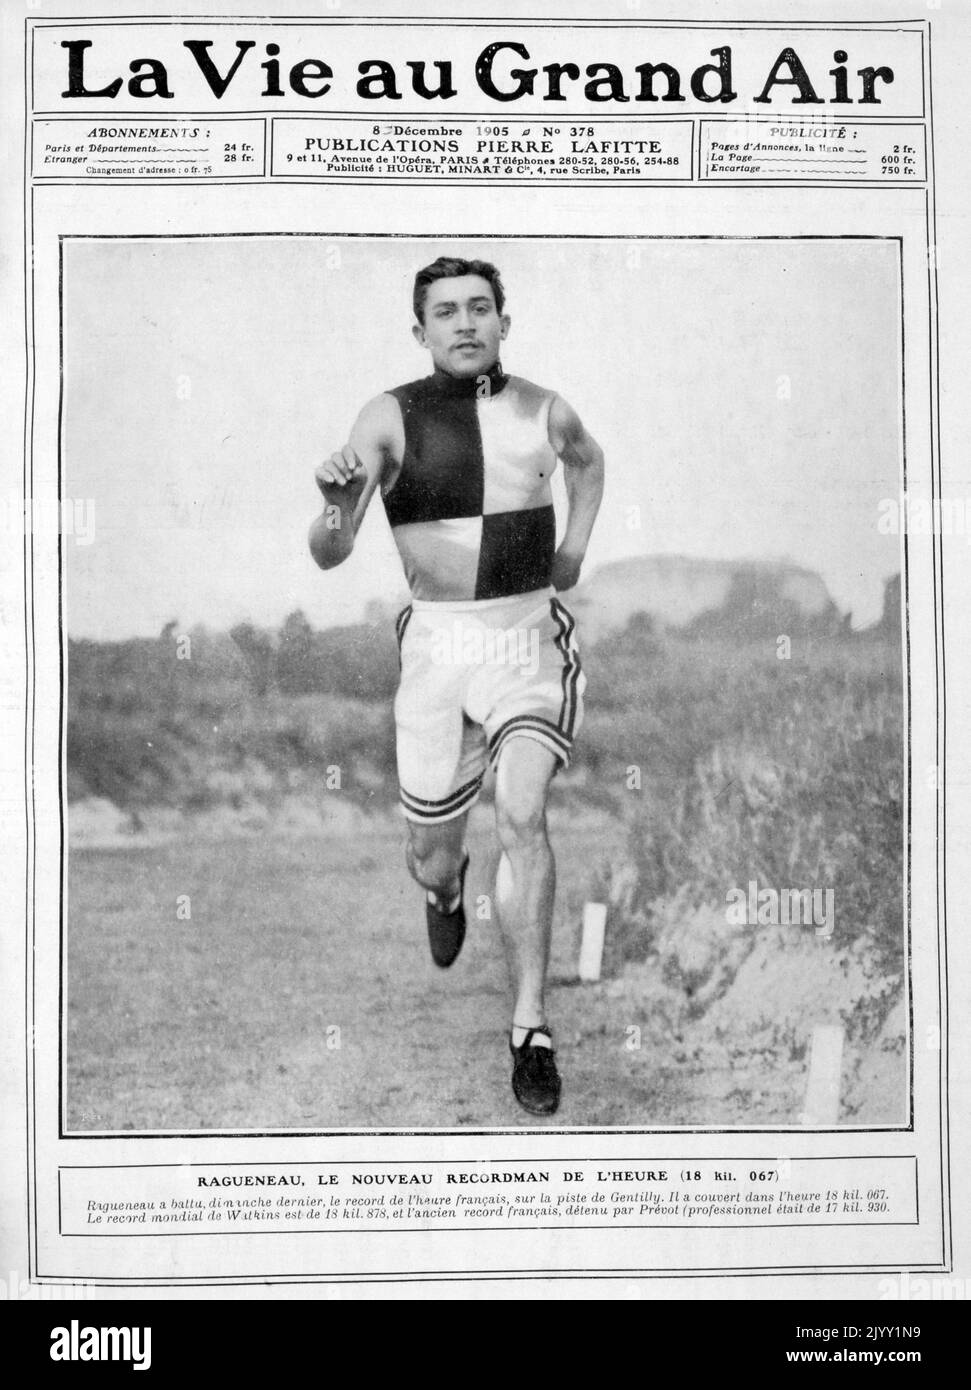 Gaston Ragueneau (Adolphe Gaston Ragueneau); (1881 - 1978), French athlete. He competed at the 1900 Summer Olympics in Paris and the 1908 Summer Olympics in London. In 1900, Ragueneau won a silver medal with the French team in the 5000 metre team race. In the 1908 Olympics, Ragueneau competed in the 1500 metres but did not finish his initial semi-final heat and did not advance to the final. Stock Photo